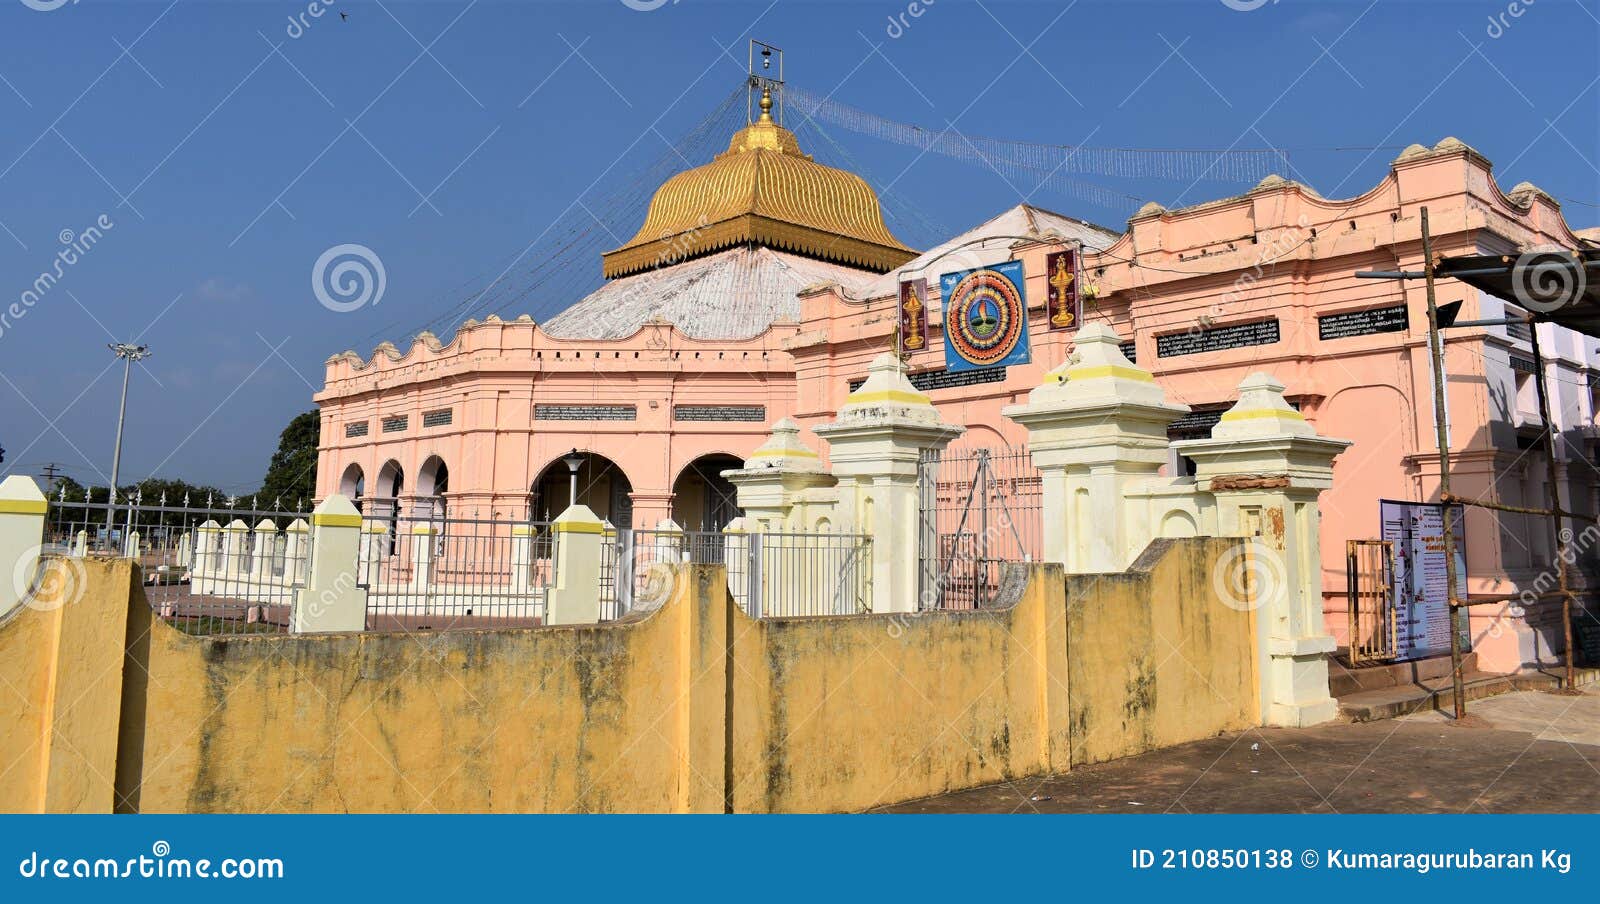 Vadalur Vallalar Temple, Timings, Architecture, History : Vadalur ...